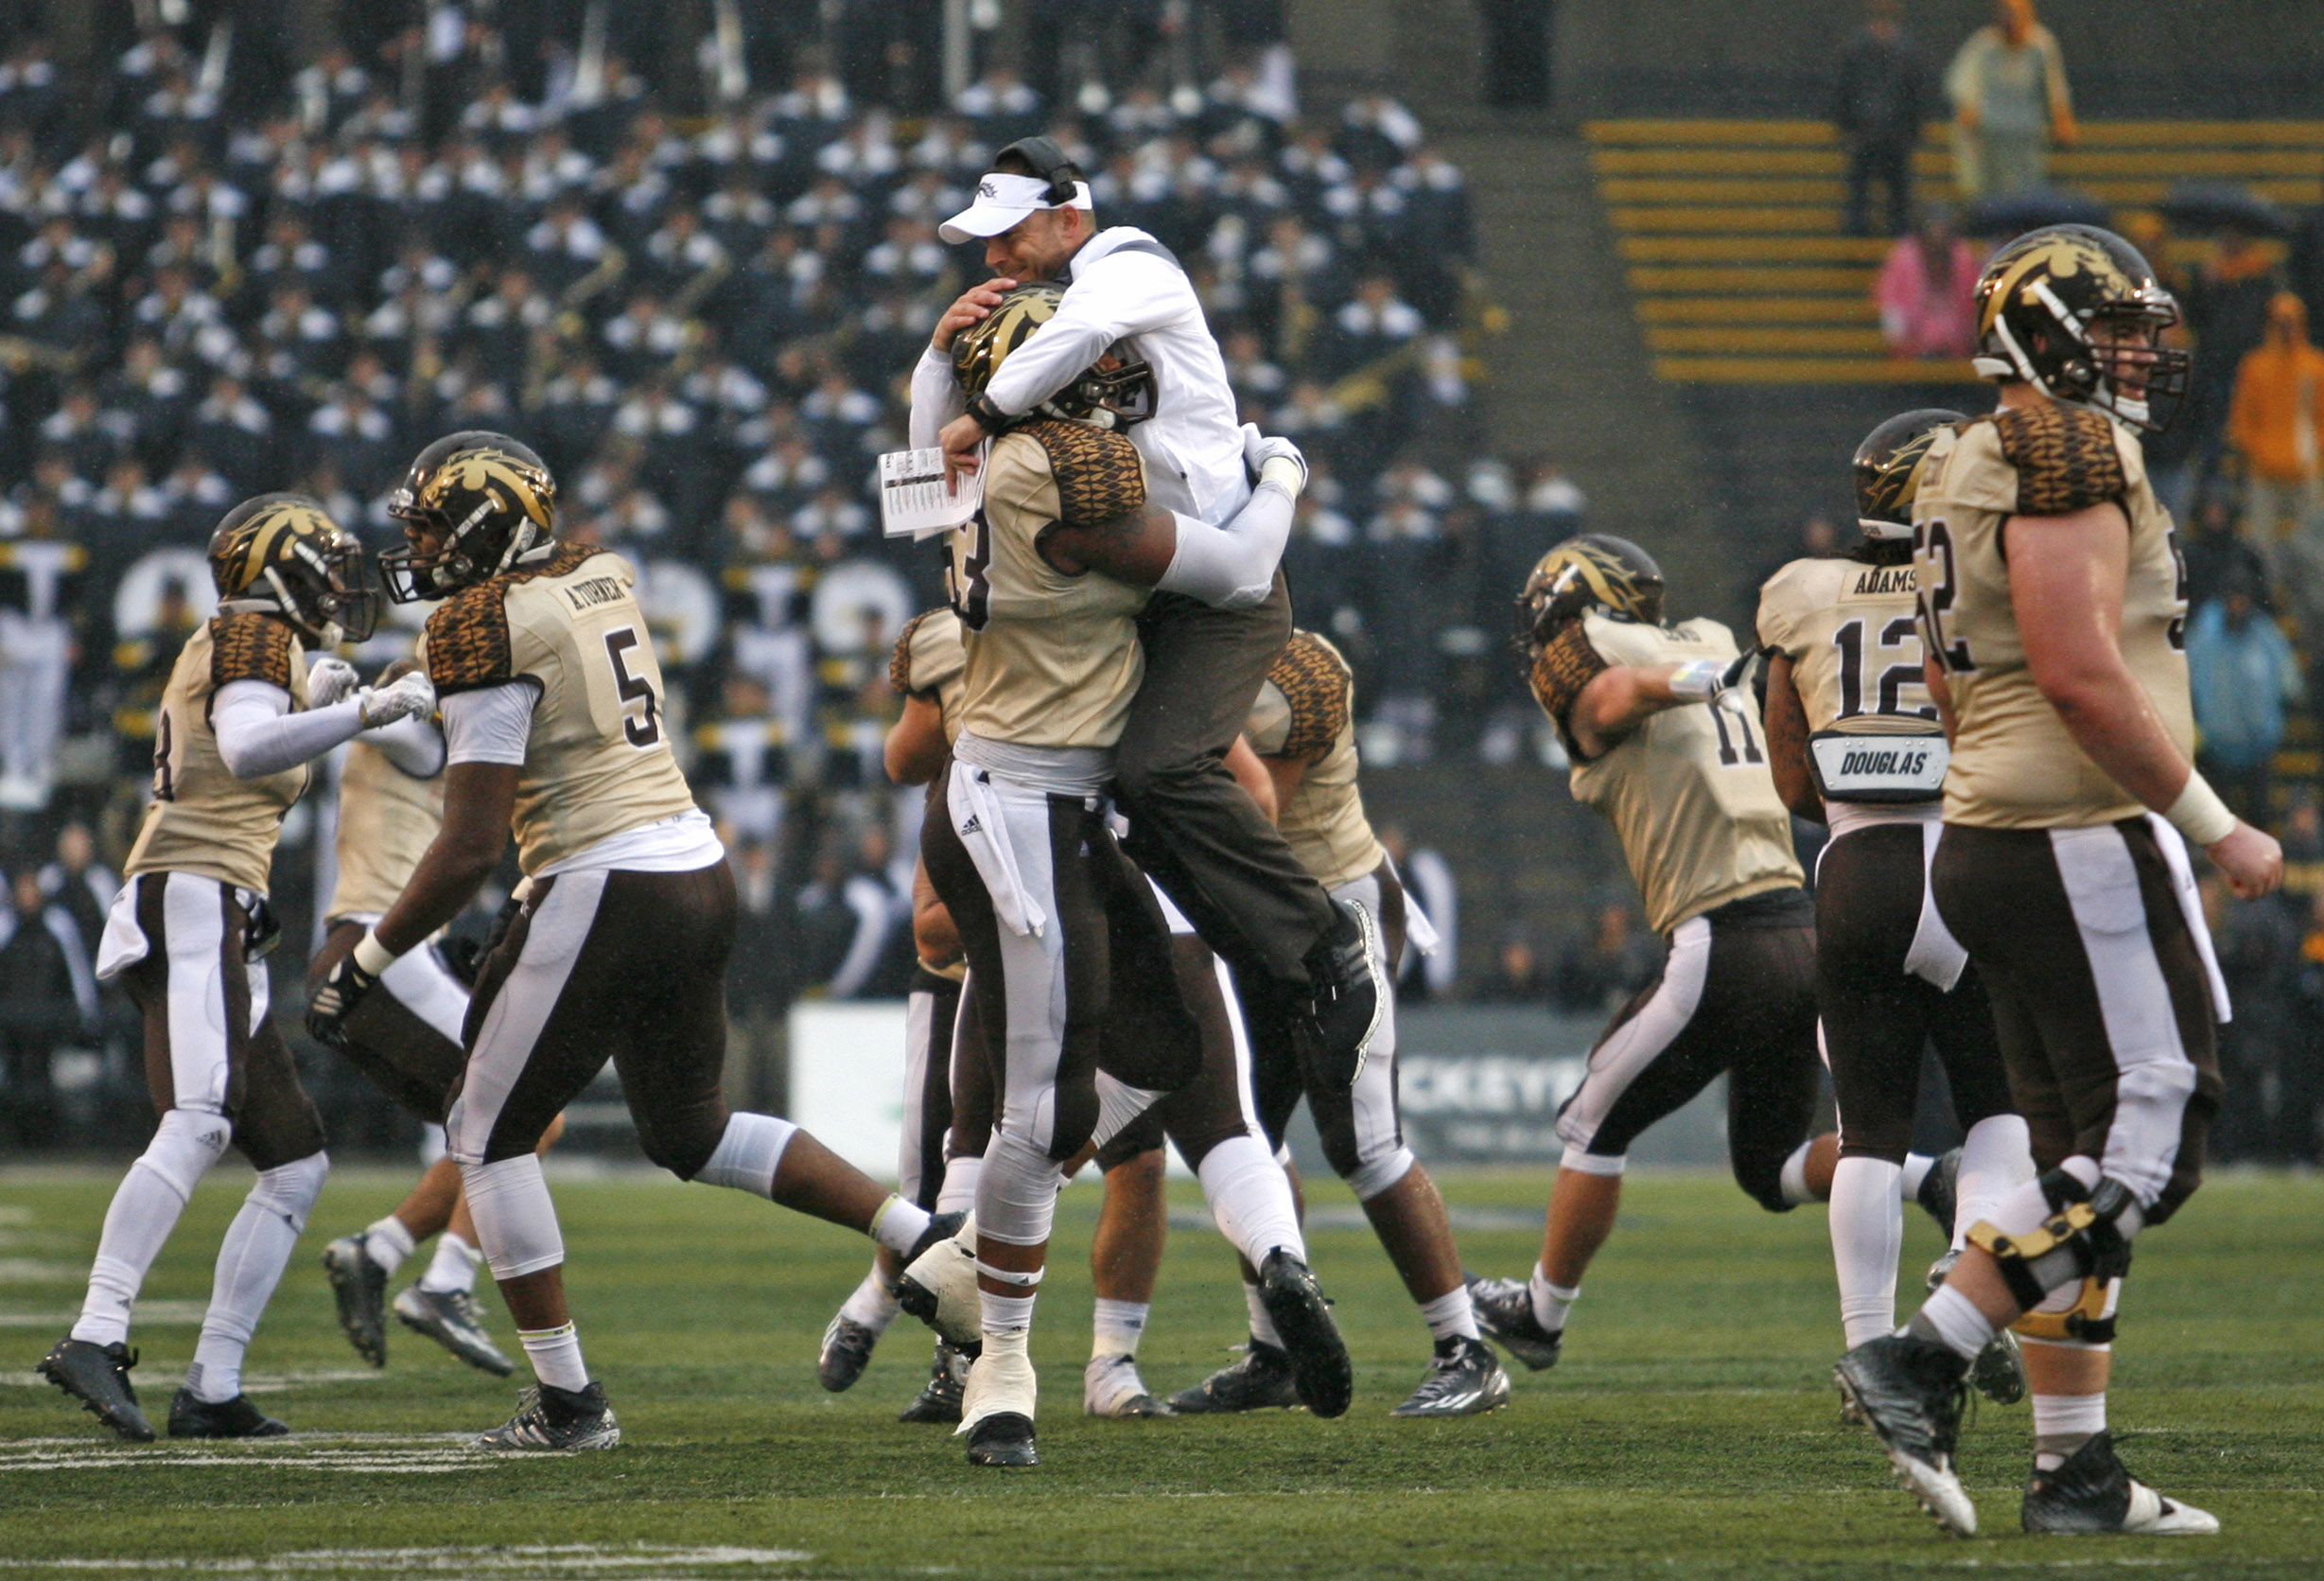 Nov 27, 2015; Toledo, OH, USA; Western Michigan Broncos head coach P.J. Fleck celebrates with his team after a play during the fourth quarter against the Toledo Rockets at Glass Bowl. Broncos win 35-30. Mandatory Credit: Raj Mehta-USA TODAY Sports